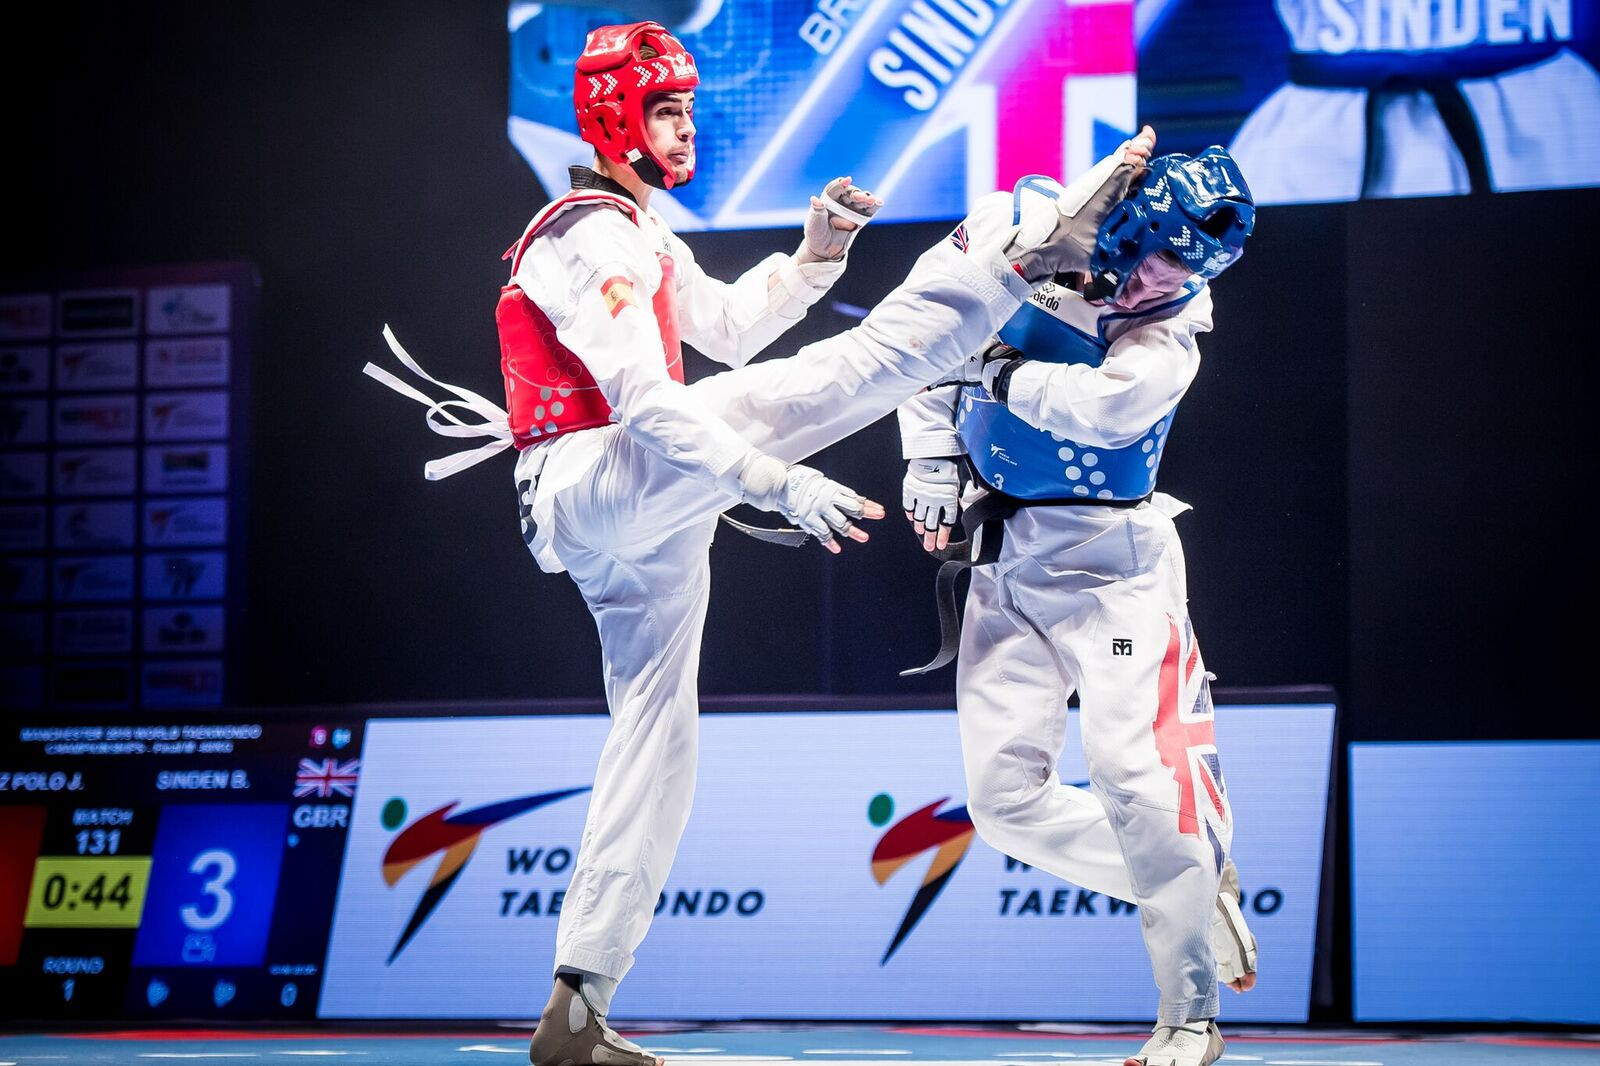 insidethegames are reporting LIVE from the 2019 World Taekwondo Championships in Manchester